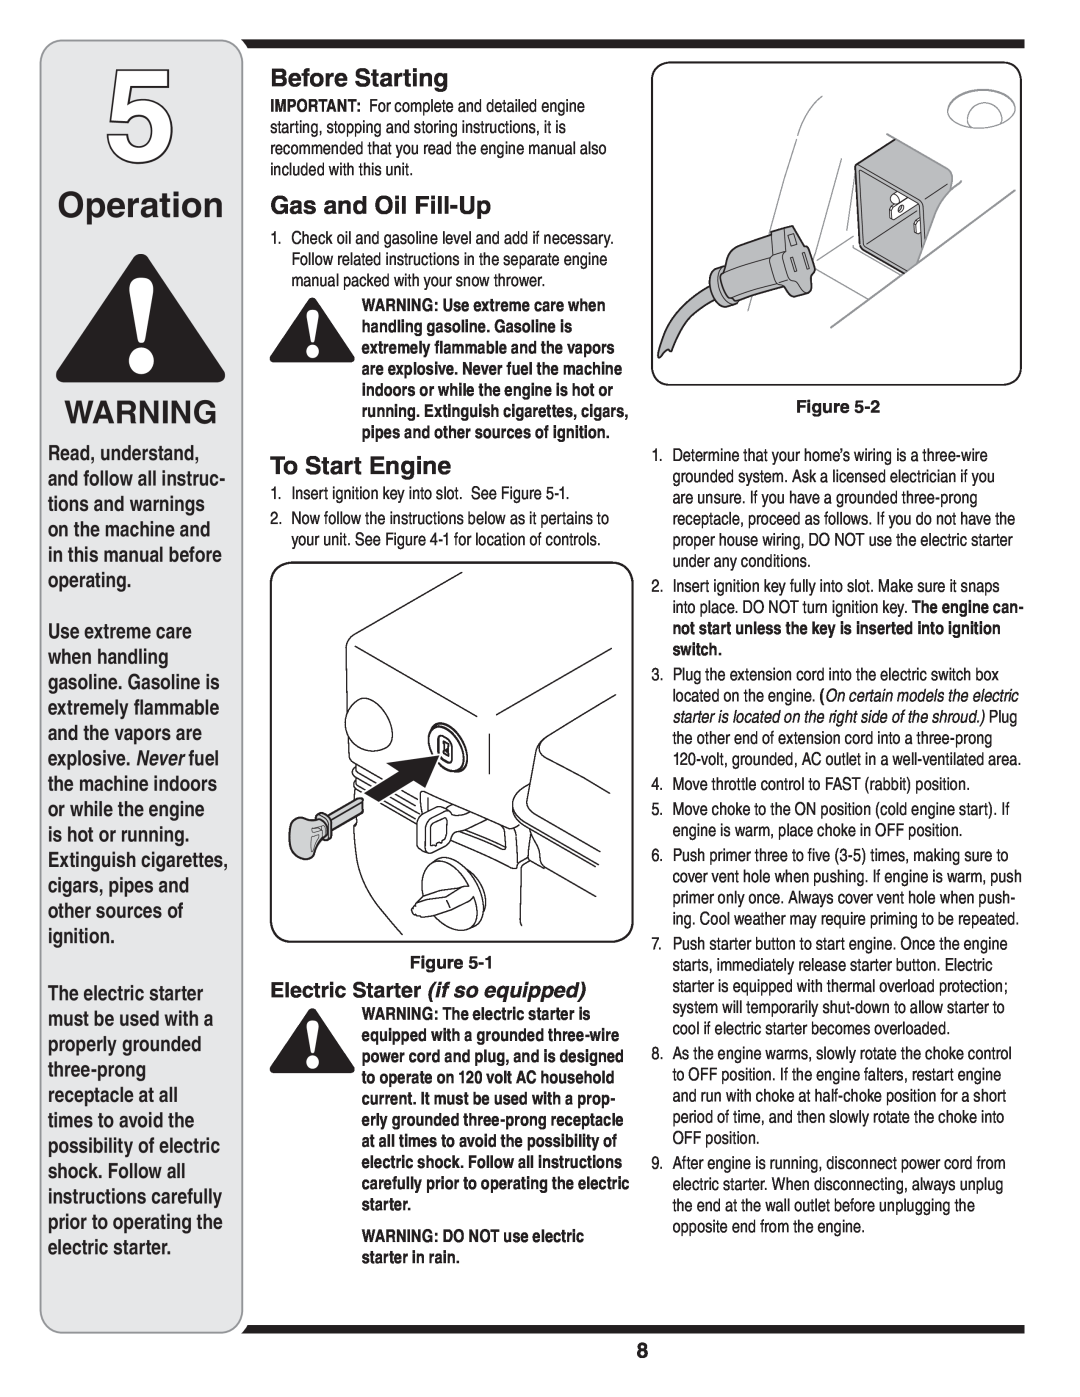 MTD 2N1 Operation, Before Starting, Gas and Oil Fill-Up, To Start Engine, WARNING DO NOT use electric starter in rain 